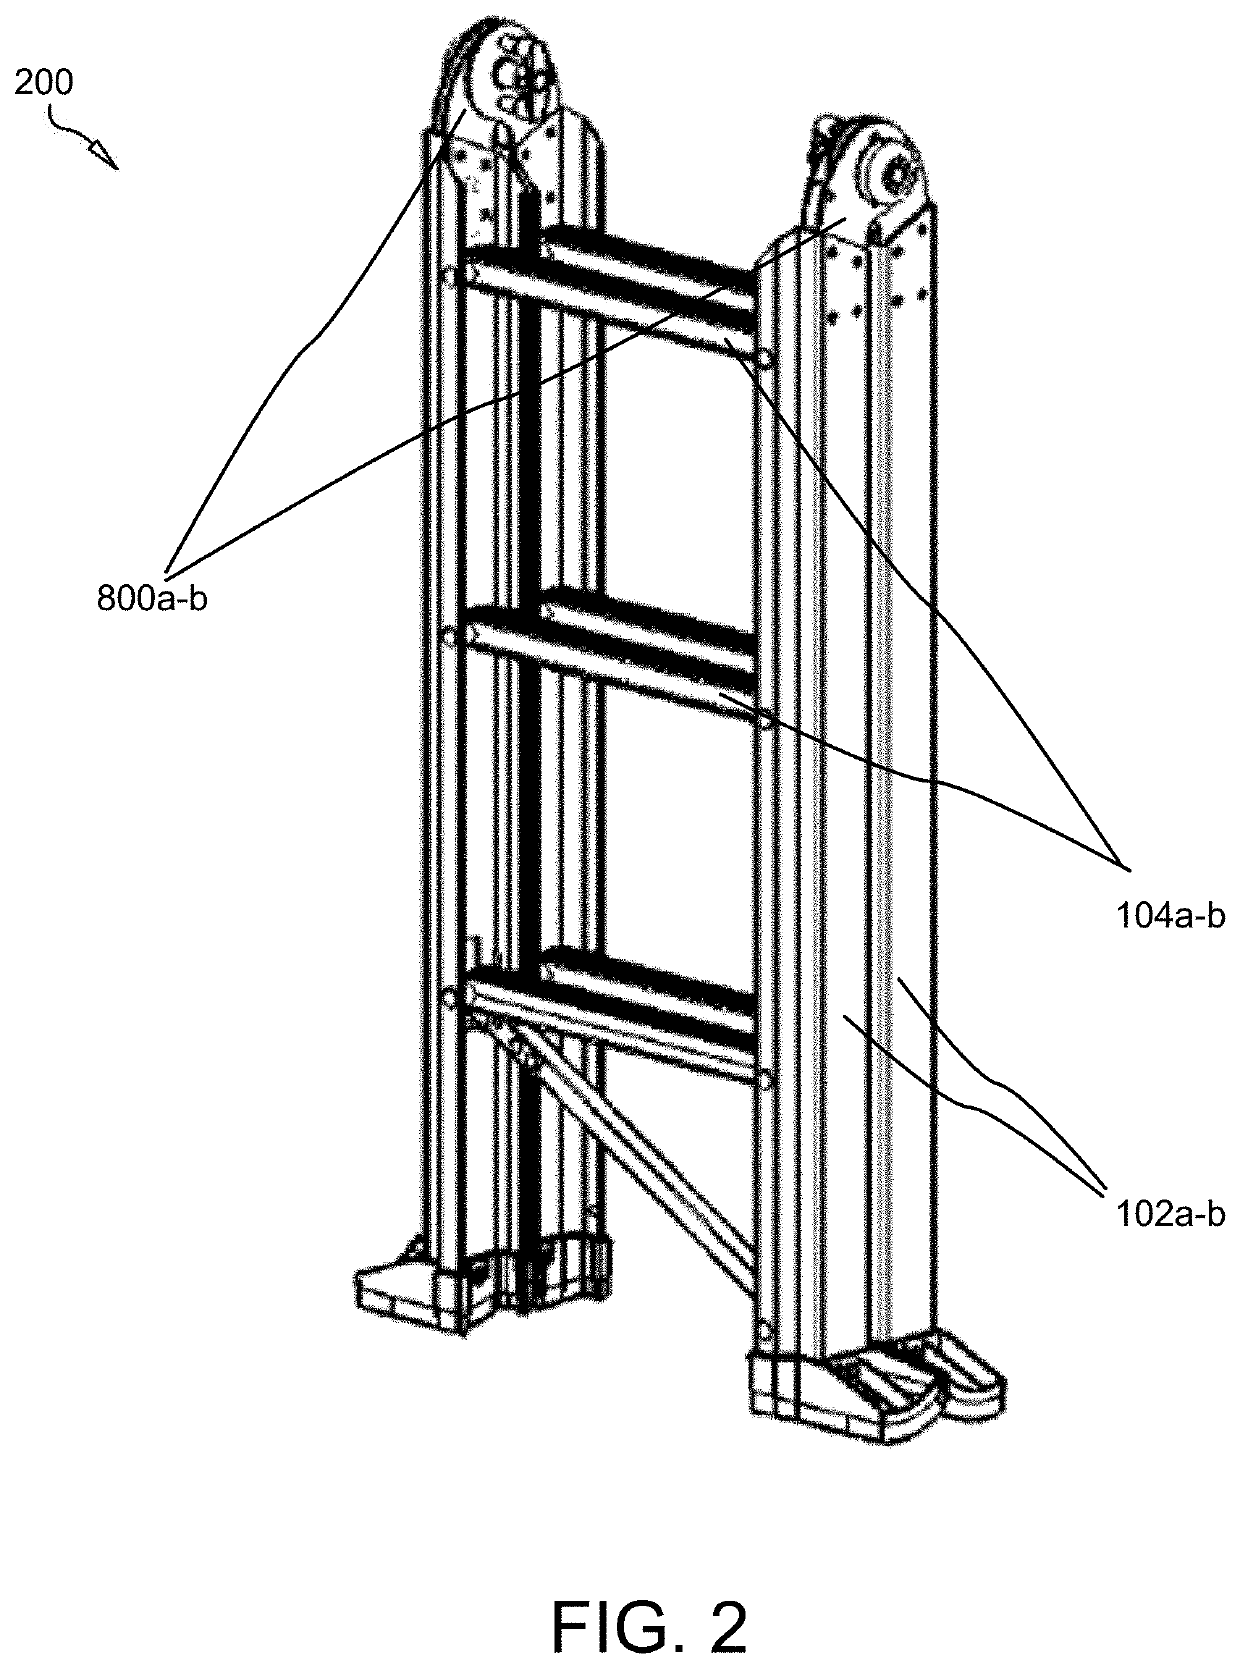 Step Ladder with Hinged Rungs Operable to Collapse on Multiple Axes